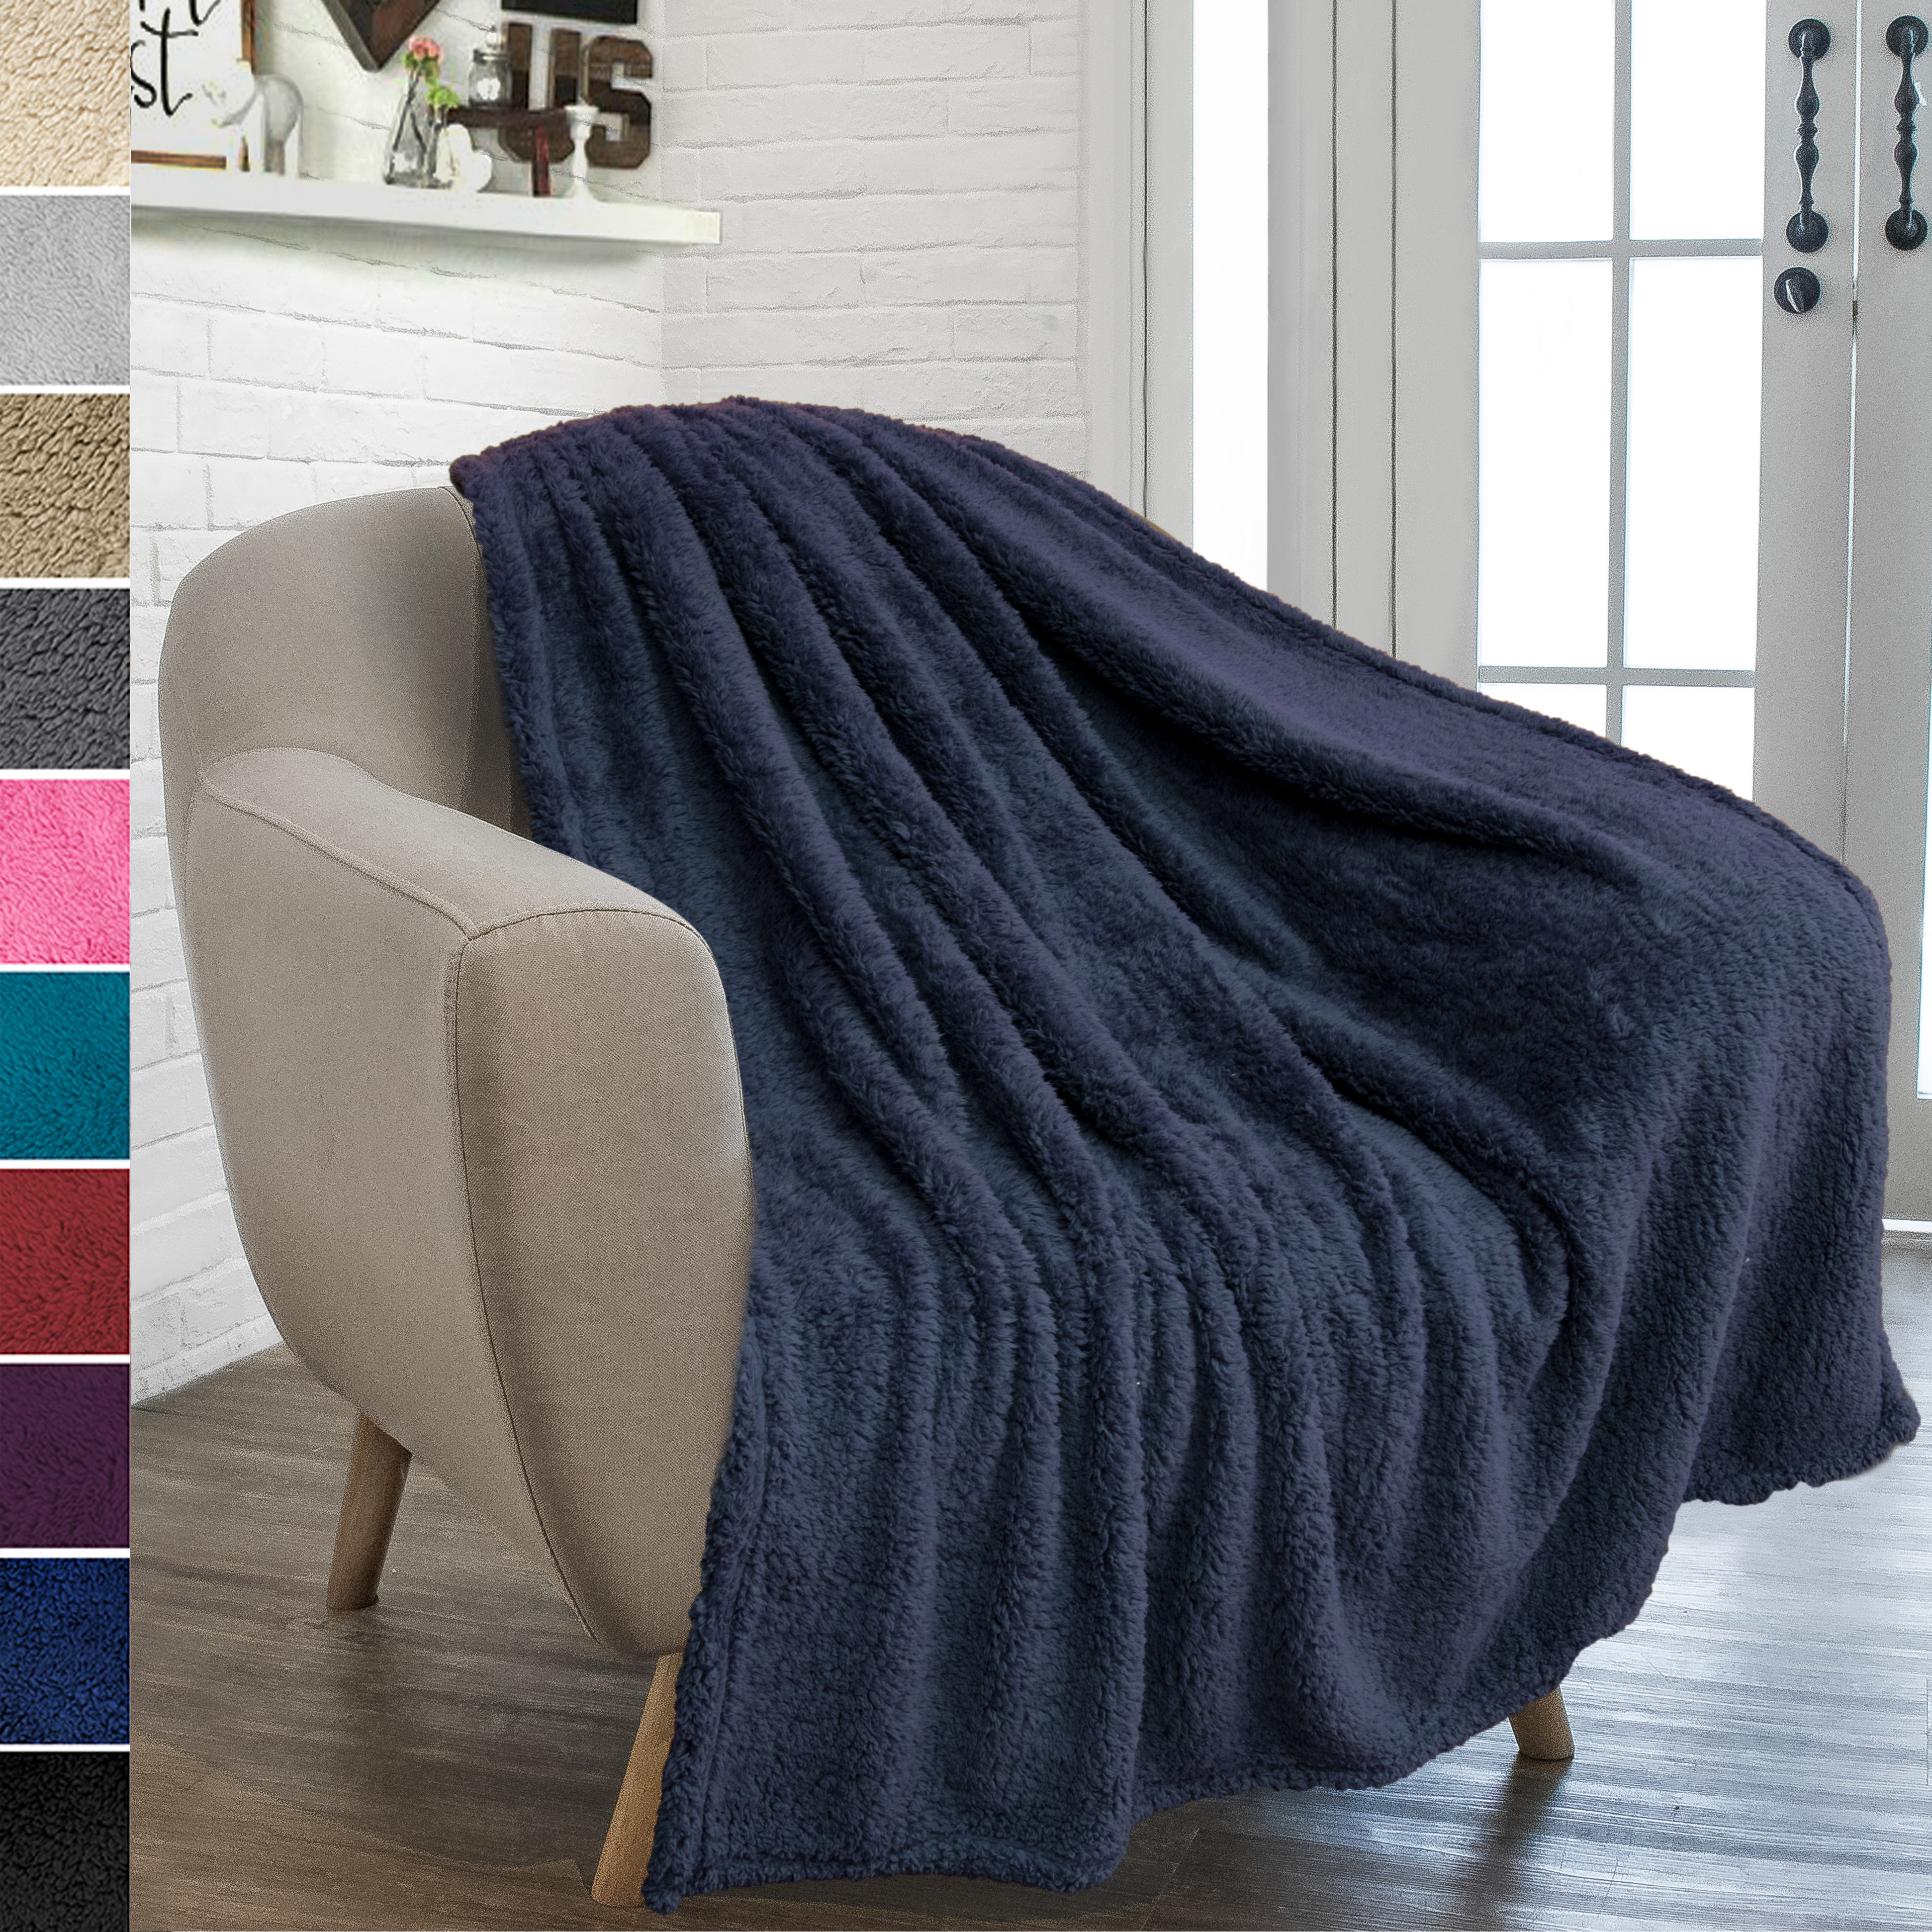 Vandarllin Sherpa Throw Blanket Retro Wood Grain Texture Door Cozy Fuzzy Plush Flannel Throws for Office，Travel，Sofa，Bed，Couch，Car，50x80 Inch Red Blue 